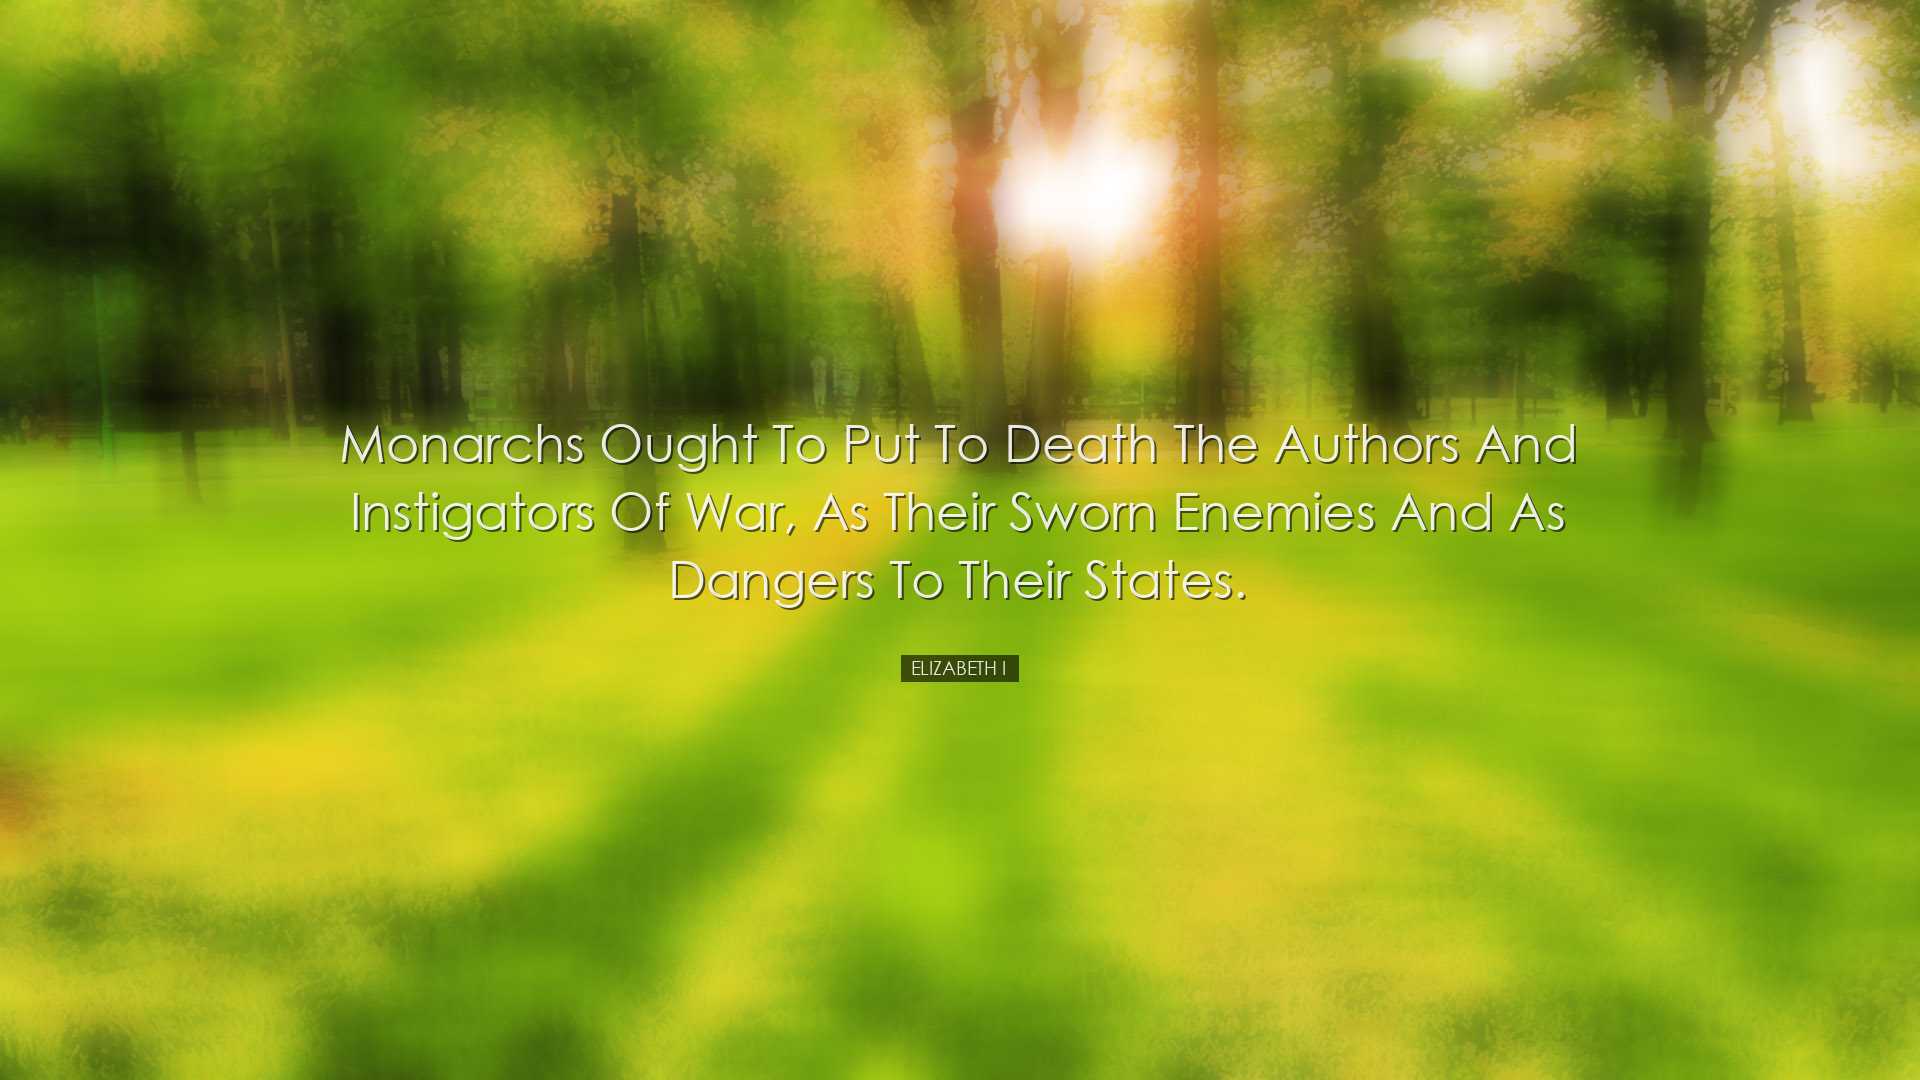 Monarchs ought to put to death the authors and instigators of war,